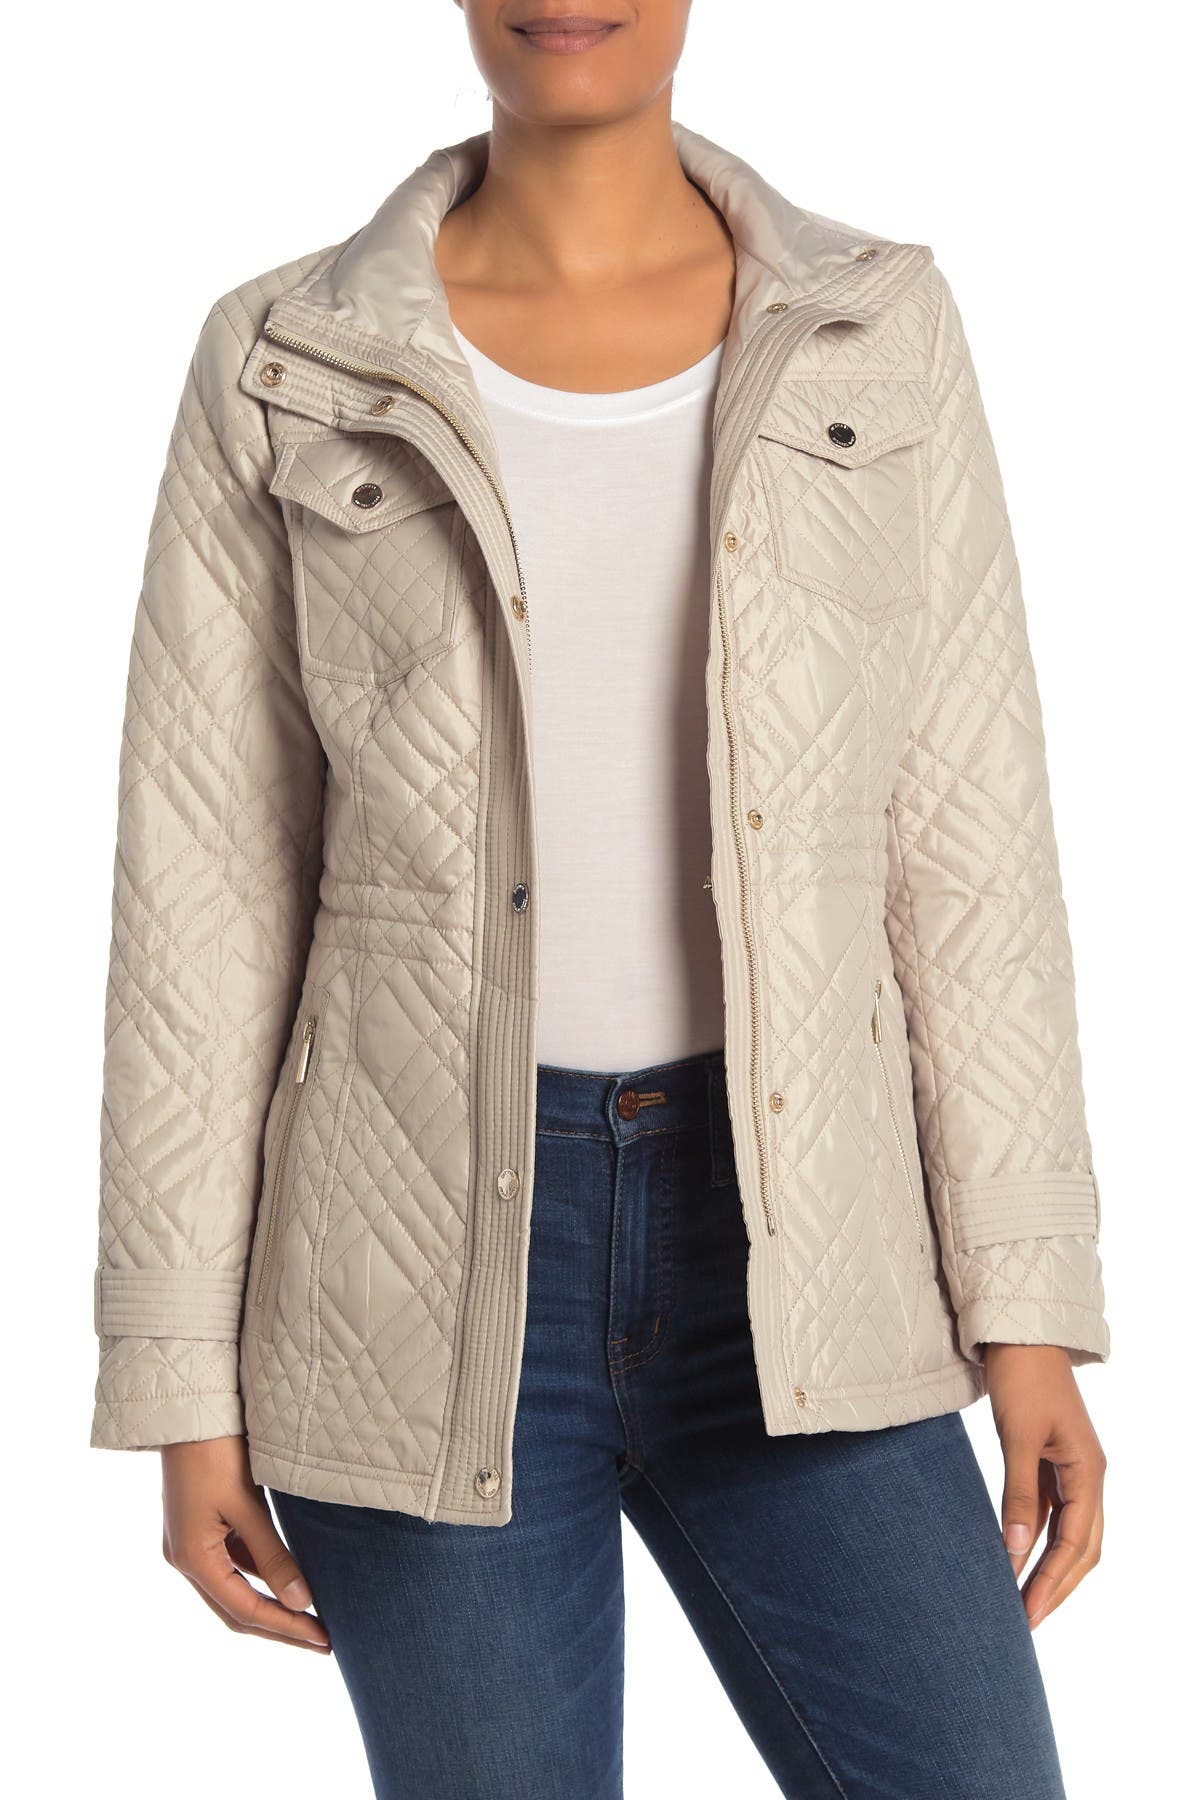 MICHAEL Michael Kors | Missy Quilted 